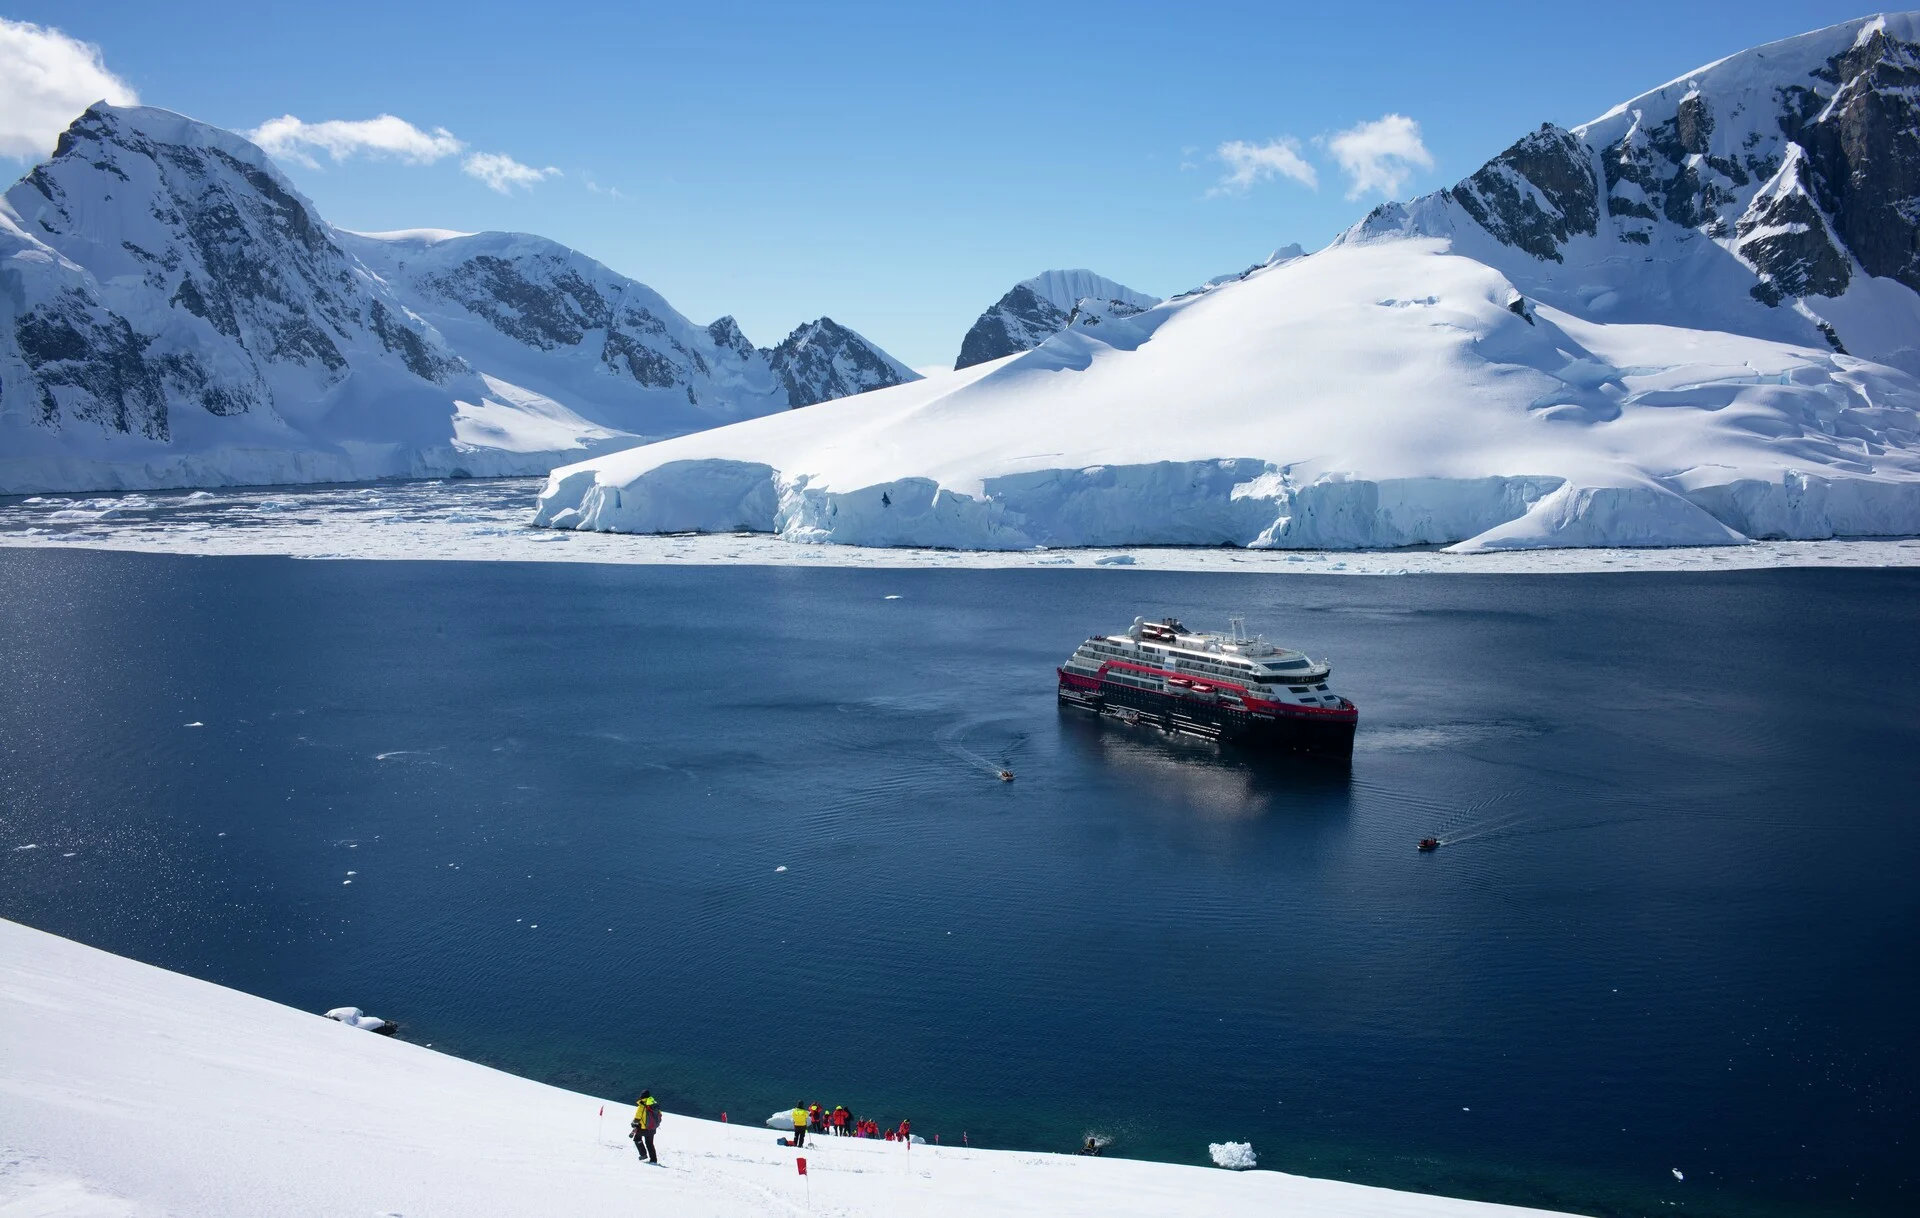 Passengers on MS Roald Amundsen are taken ashore to discover the beautiful nature of Antarctica. Credit: Svai AS.